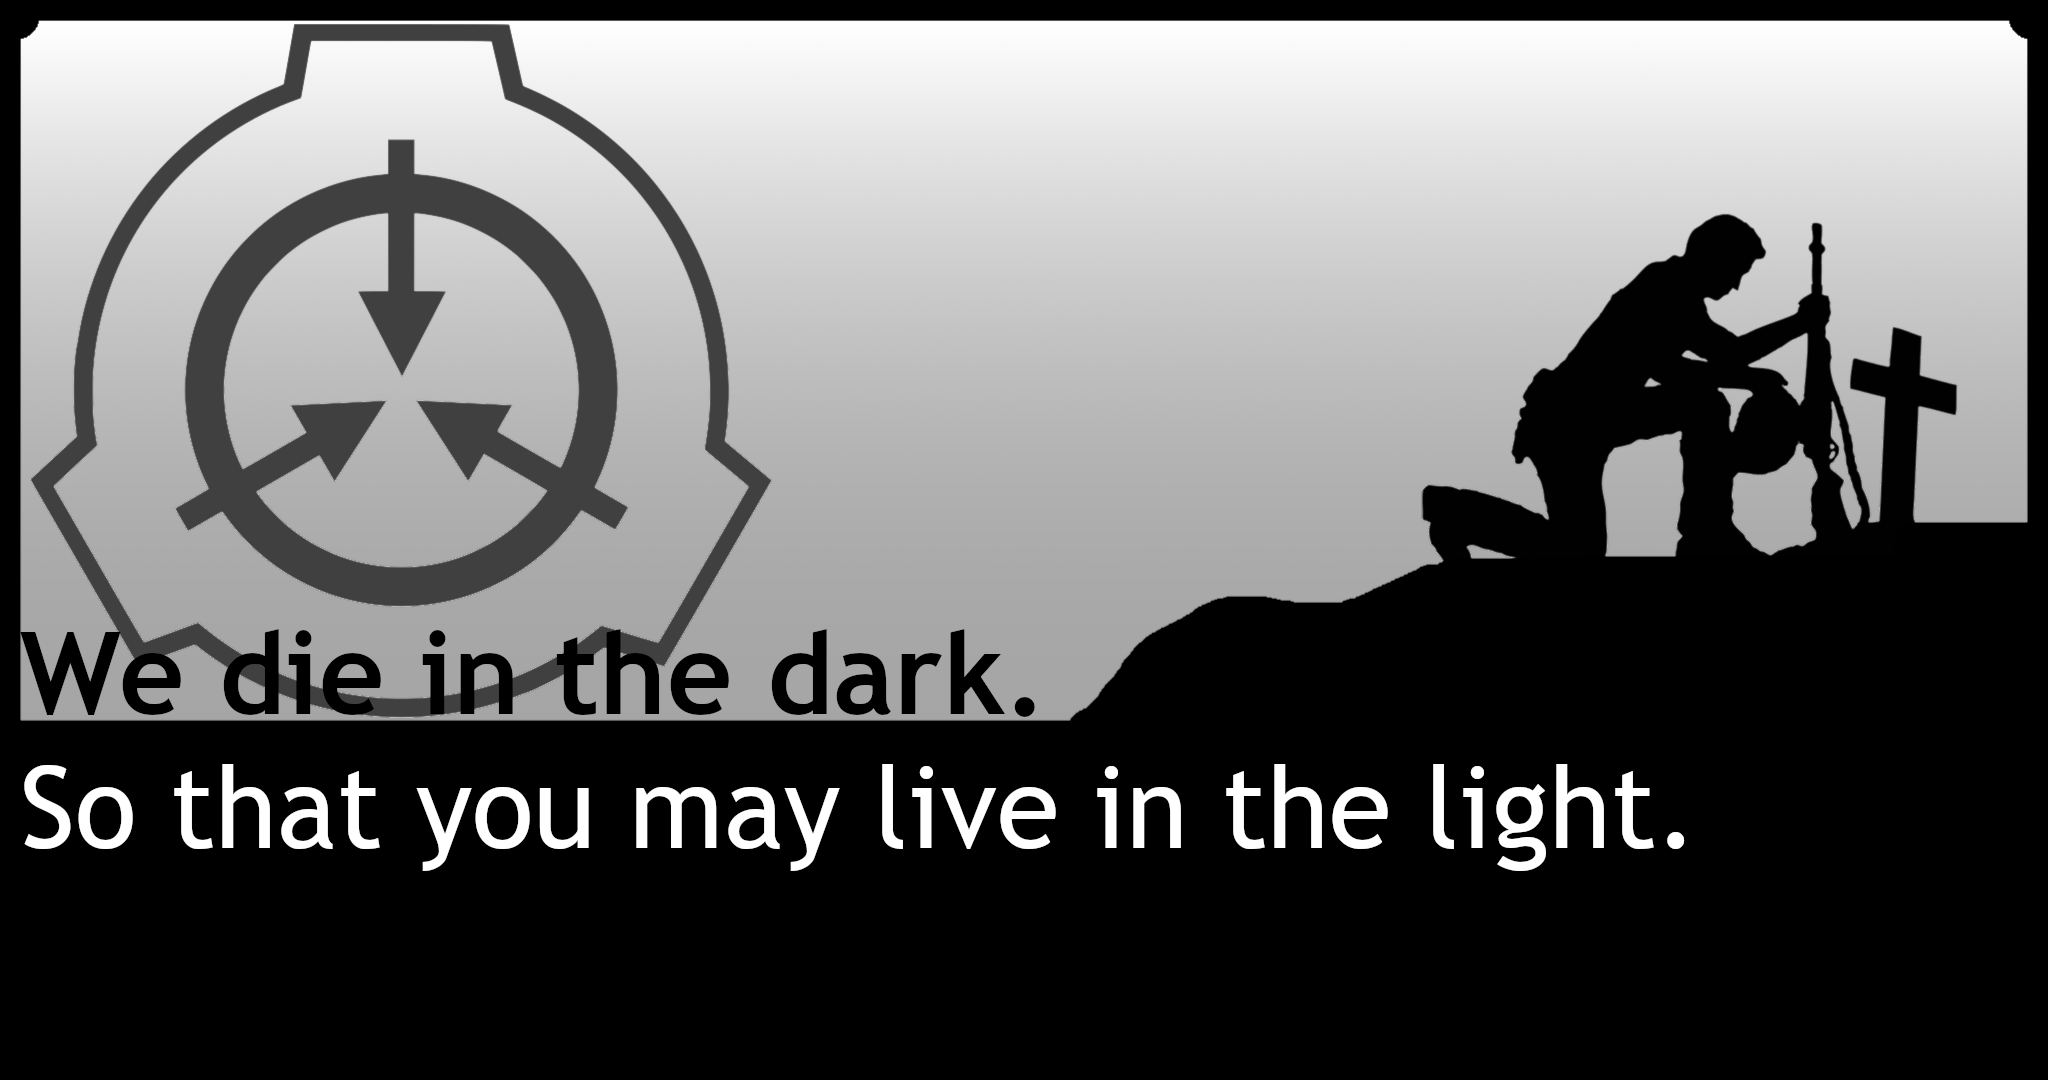 SCP Foundation Logo Wallpapers on WallpaperDog